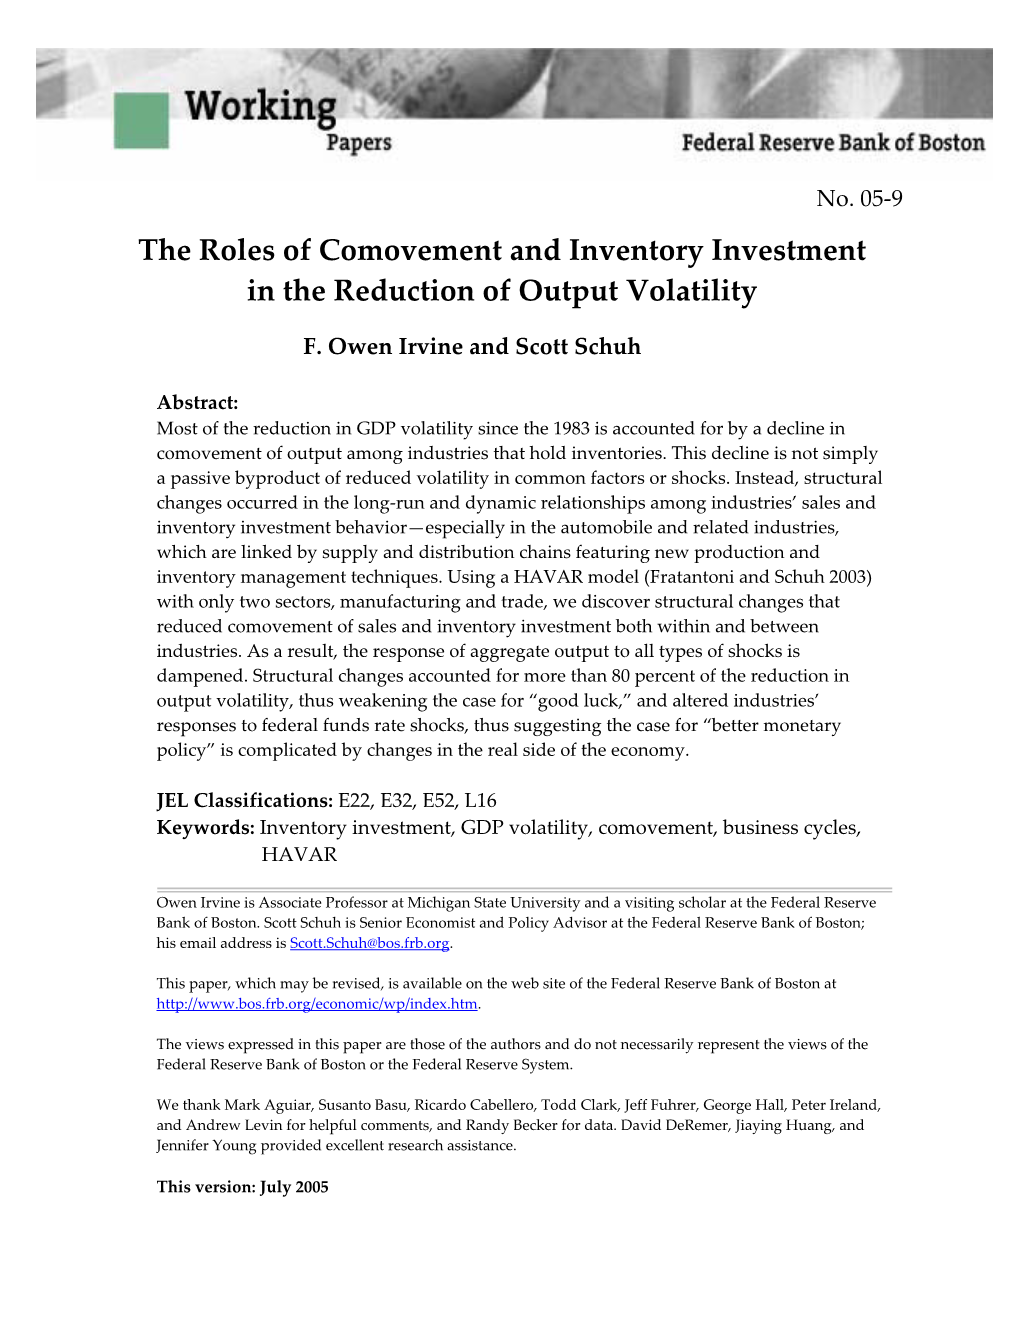 The Roles of Comovement and Inventory Investment in the Reduction of Output Volatility